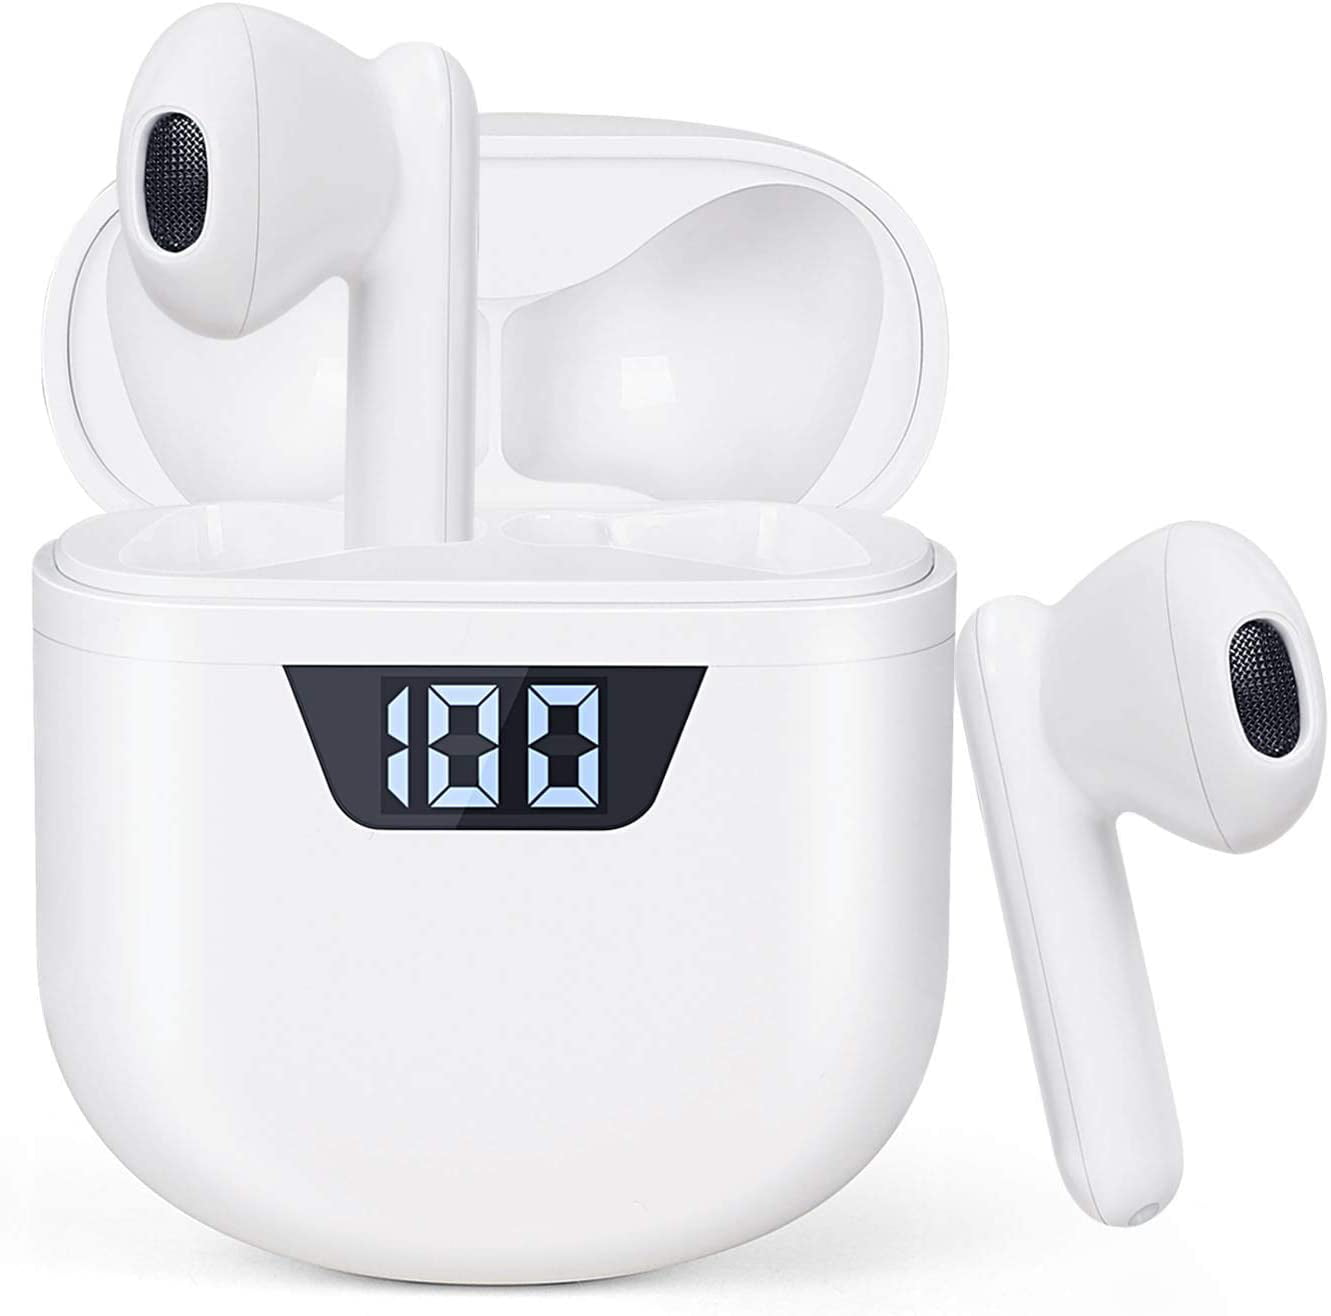 ZJL Wireless Earbuds Bluetooth 5.0 Headphones Noise Canceling Fast Charging Built-in Mic 3D Sound with Deep Bass for Airpods/Android/Running Earphone